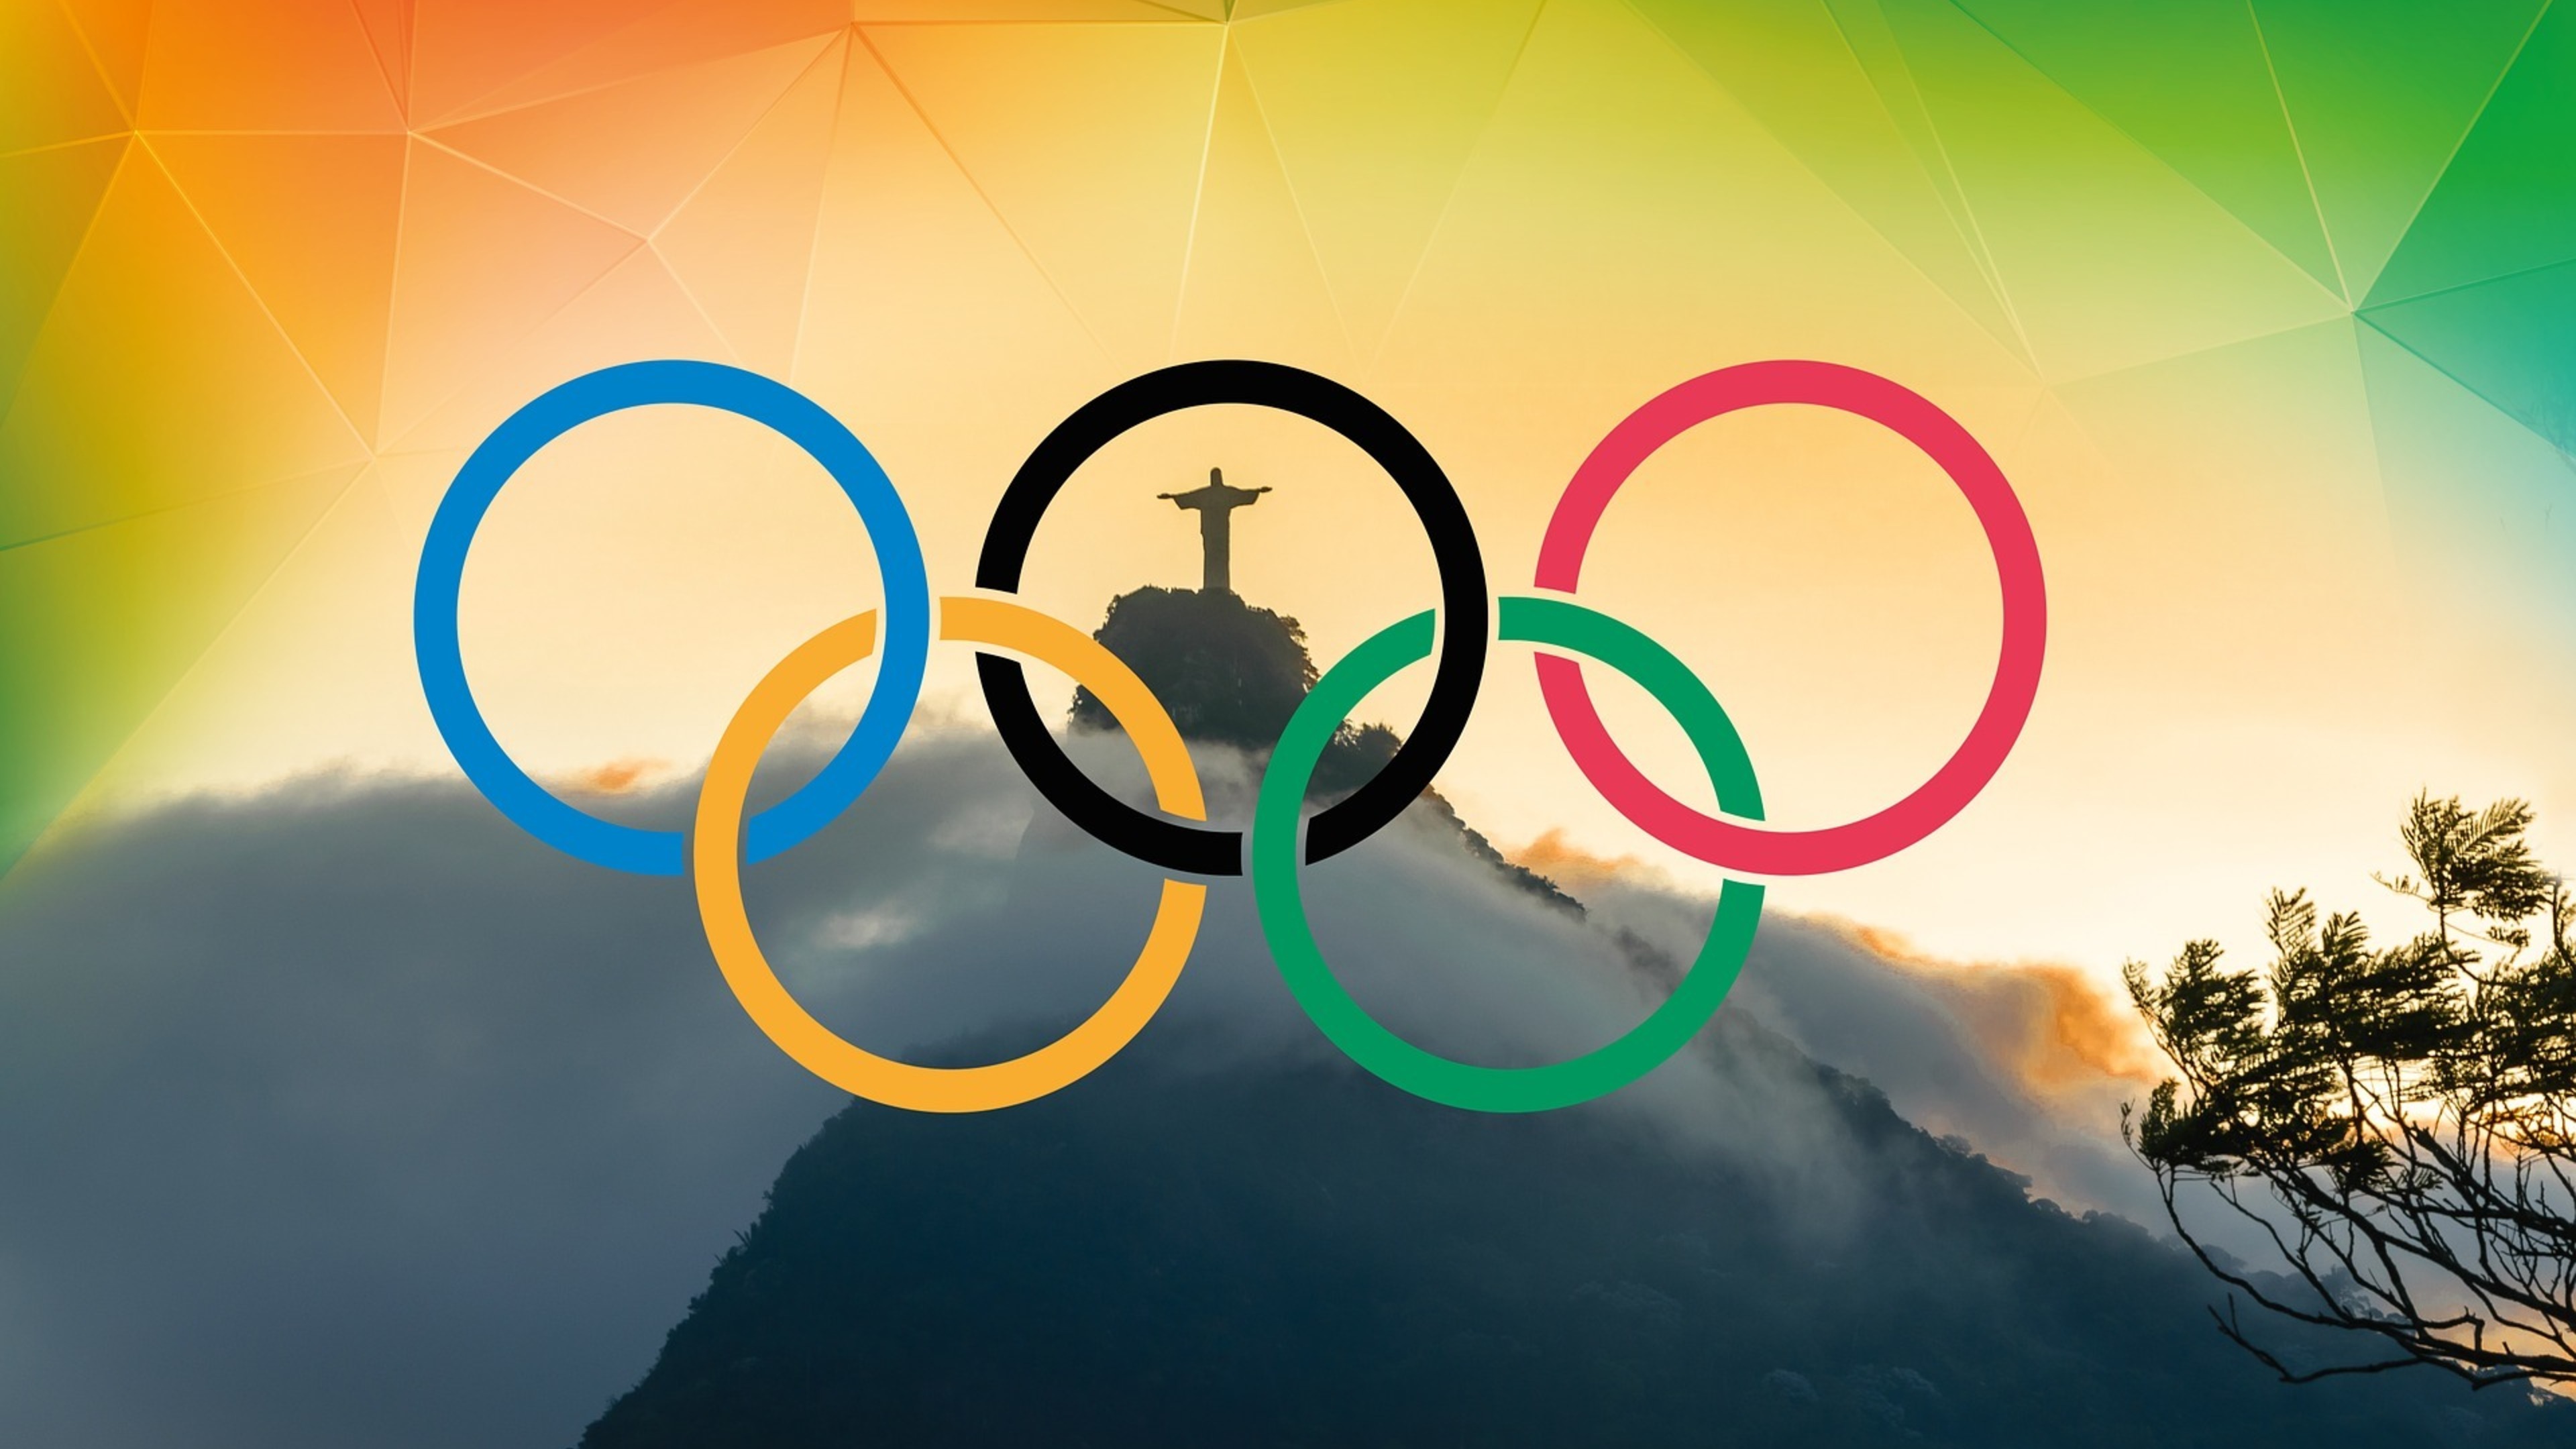 Wallpaper Weekends Rio Olympics For Mac iPhone iPad And